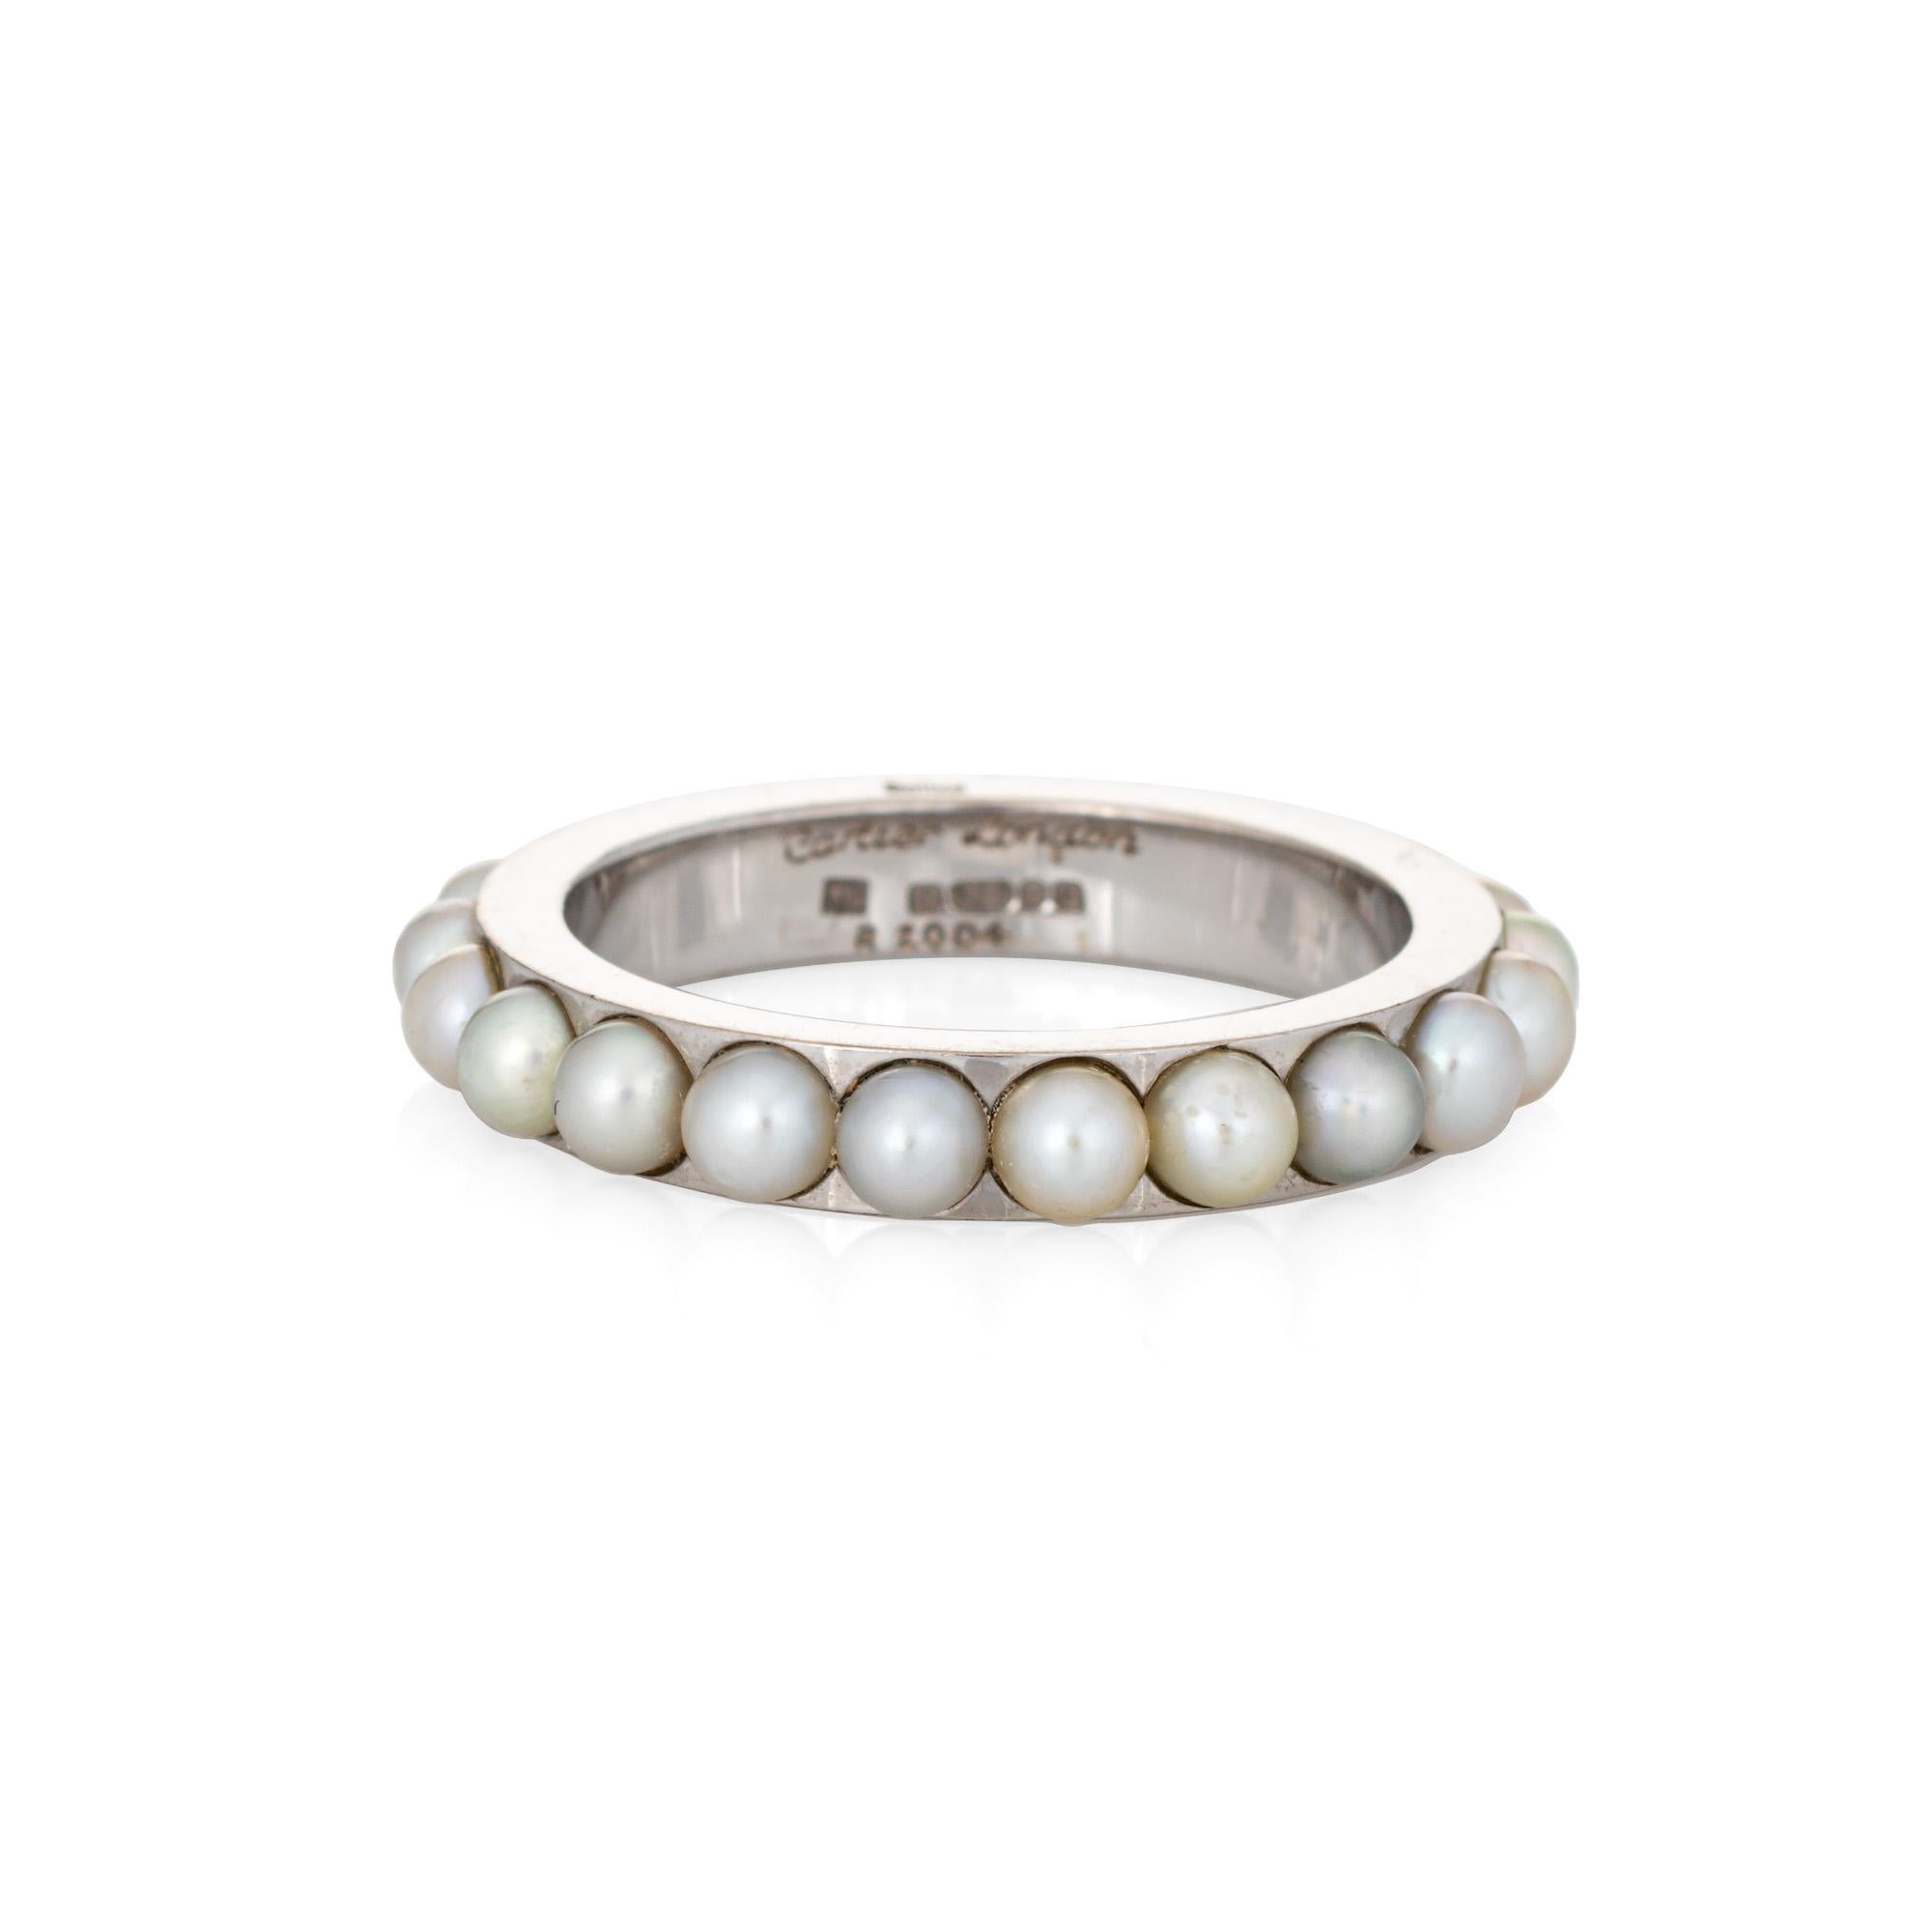 Vintage Cartier pearl eternity ring crafted in 18k white gold (circa 1979)

21 lustrous pearls measuring 3mm each are set into the band. The pearls are well matching, glossy, with soft rose overtones. Made by Cartier London in 1979 (the ring is